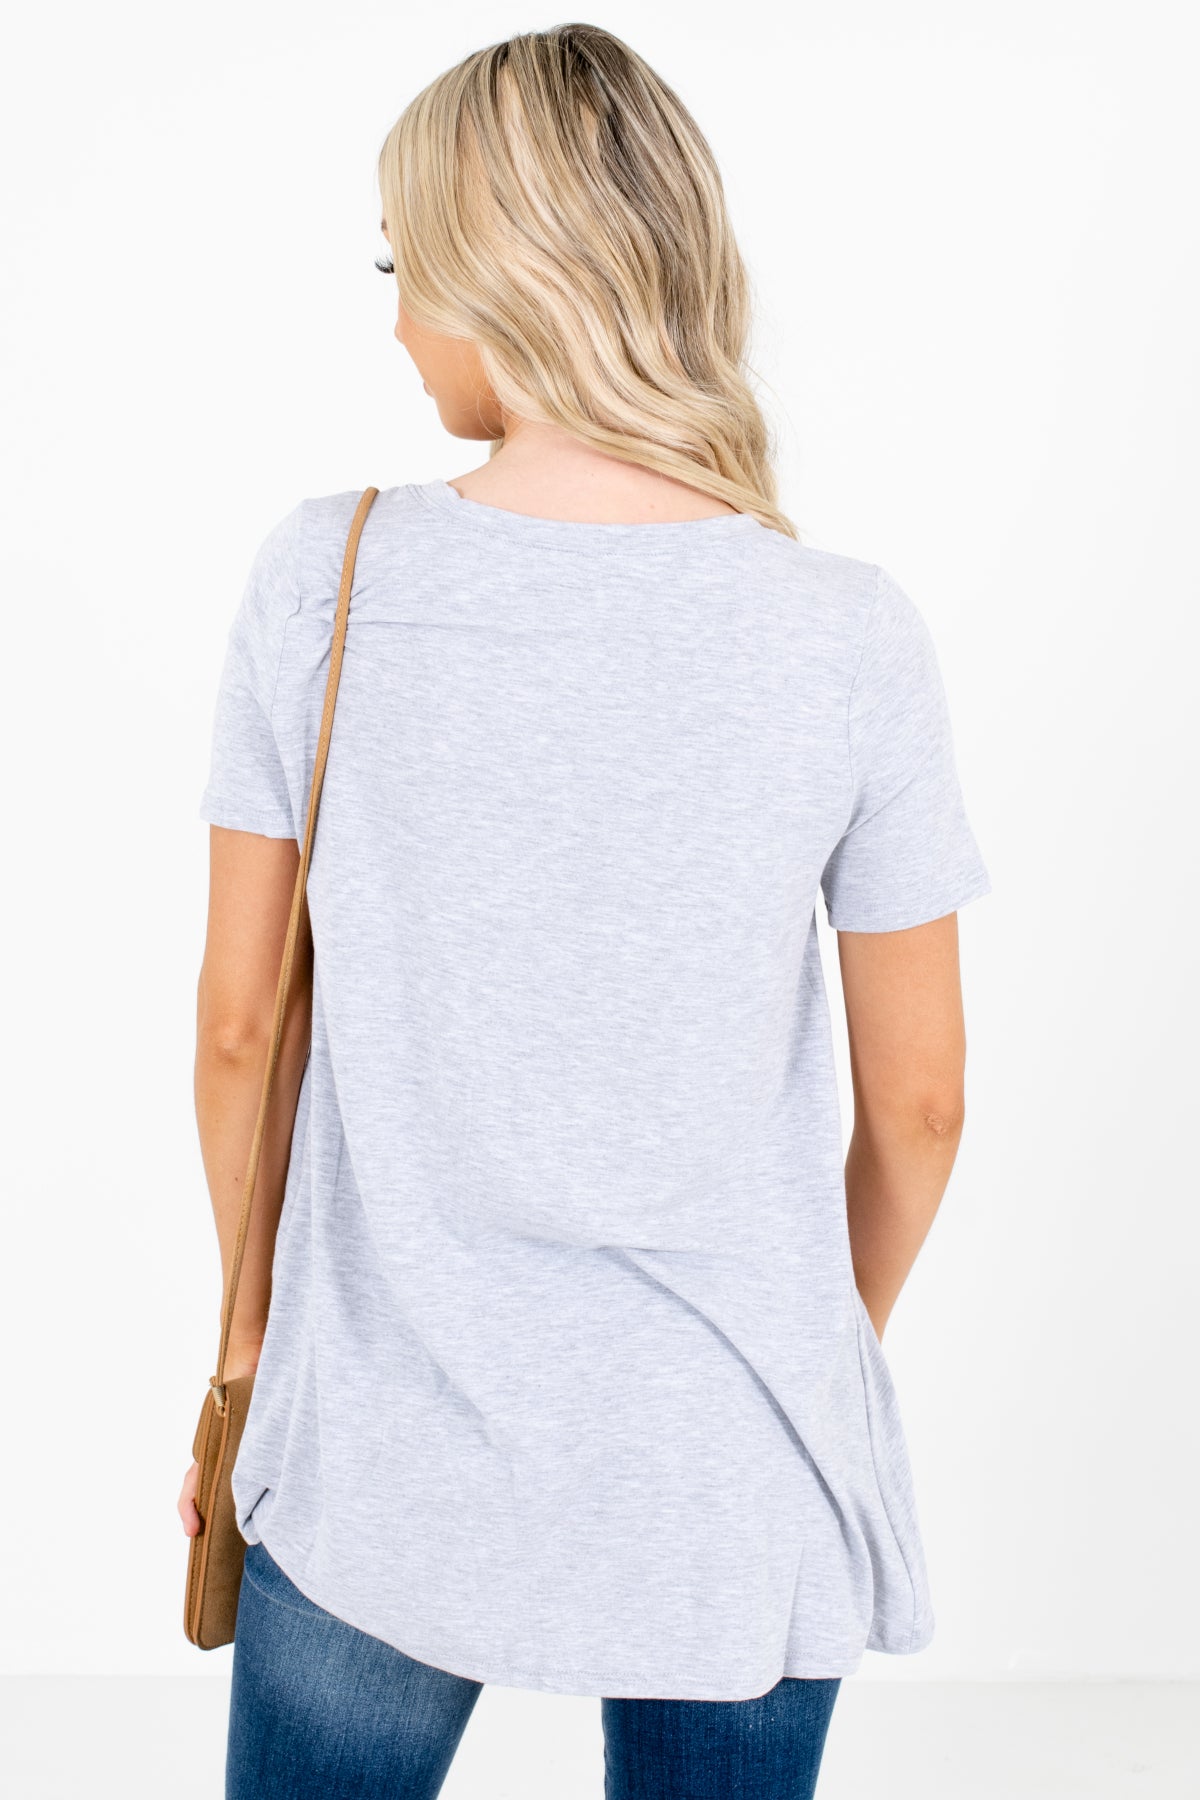 Heather Gray Boutique Top